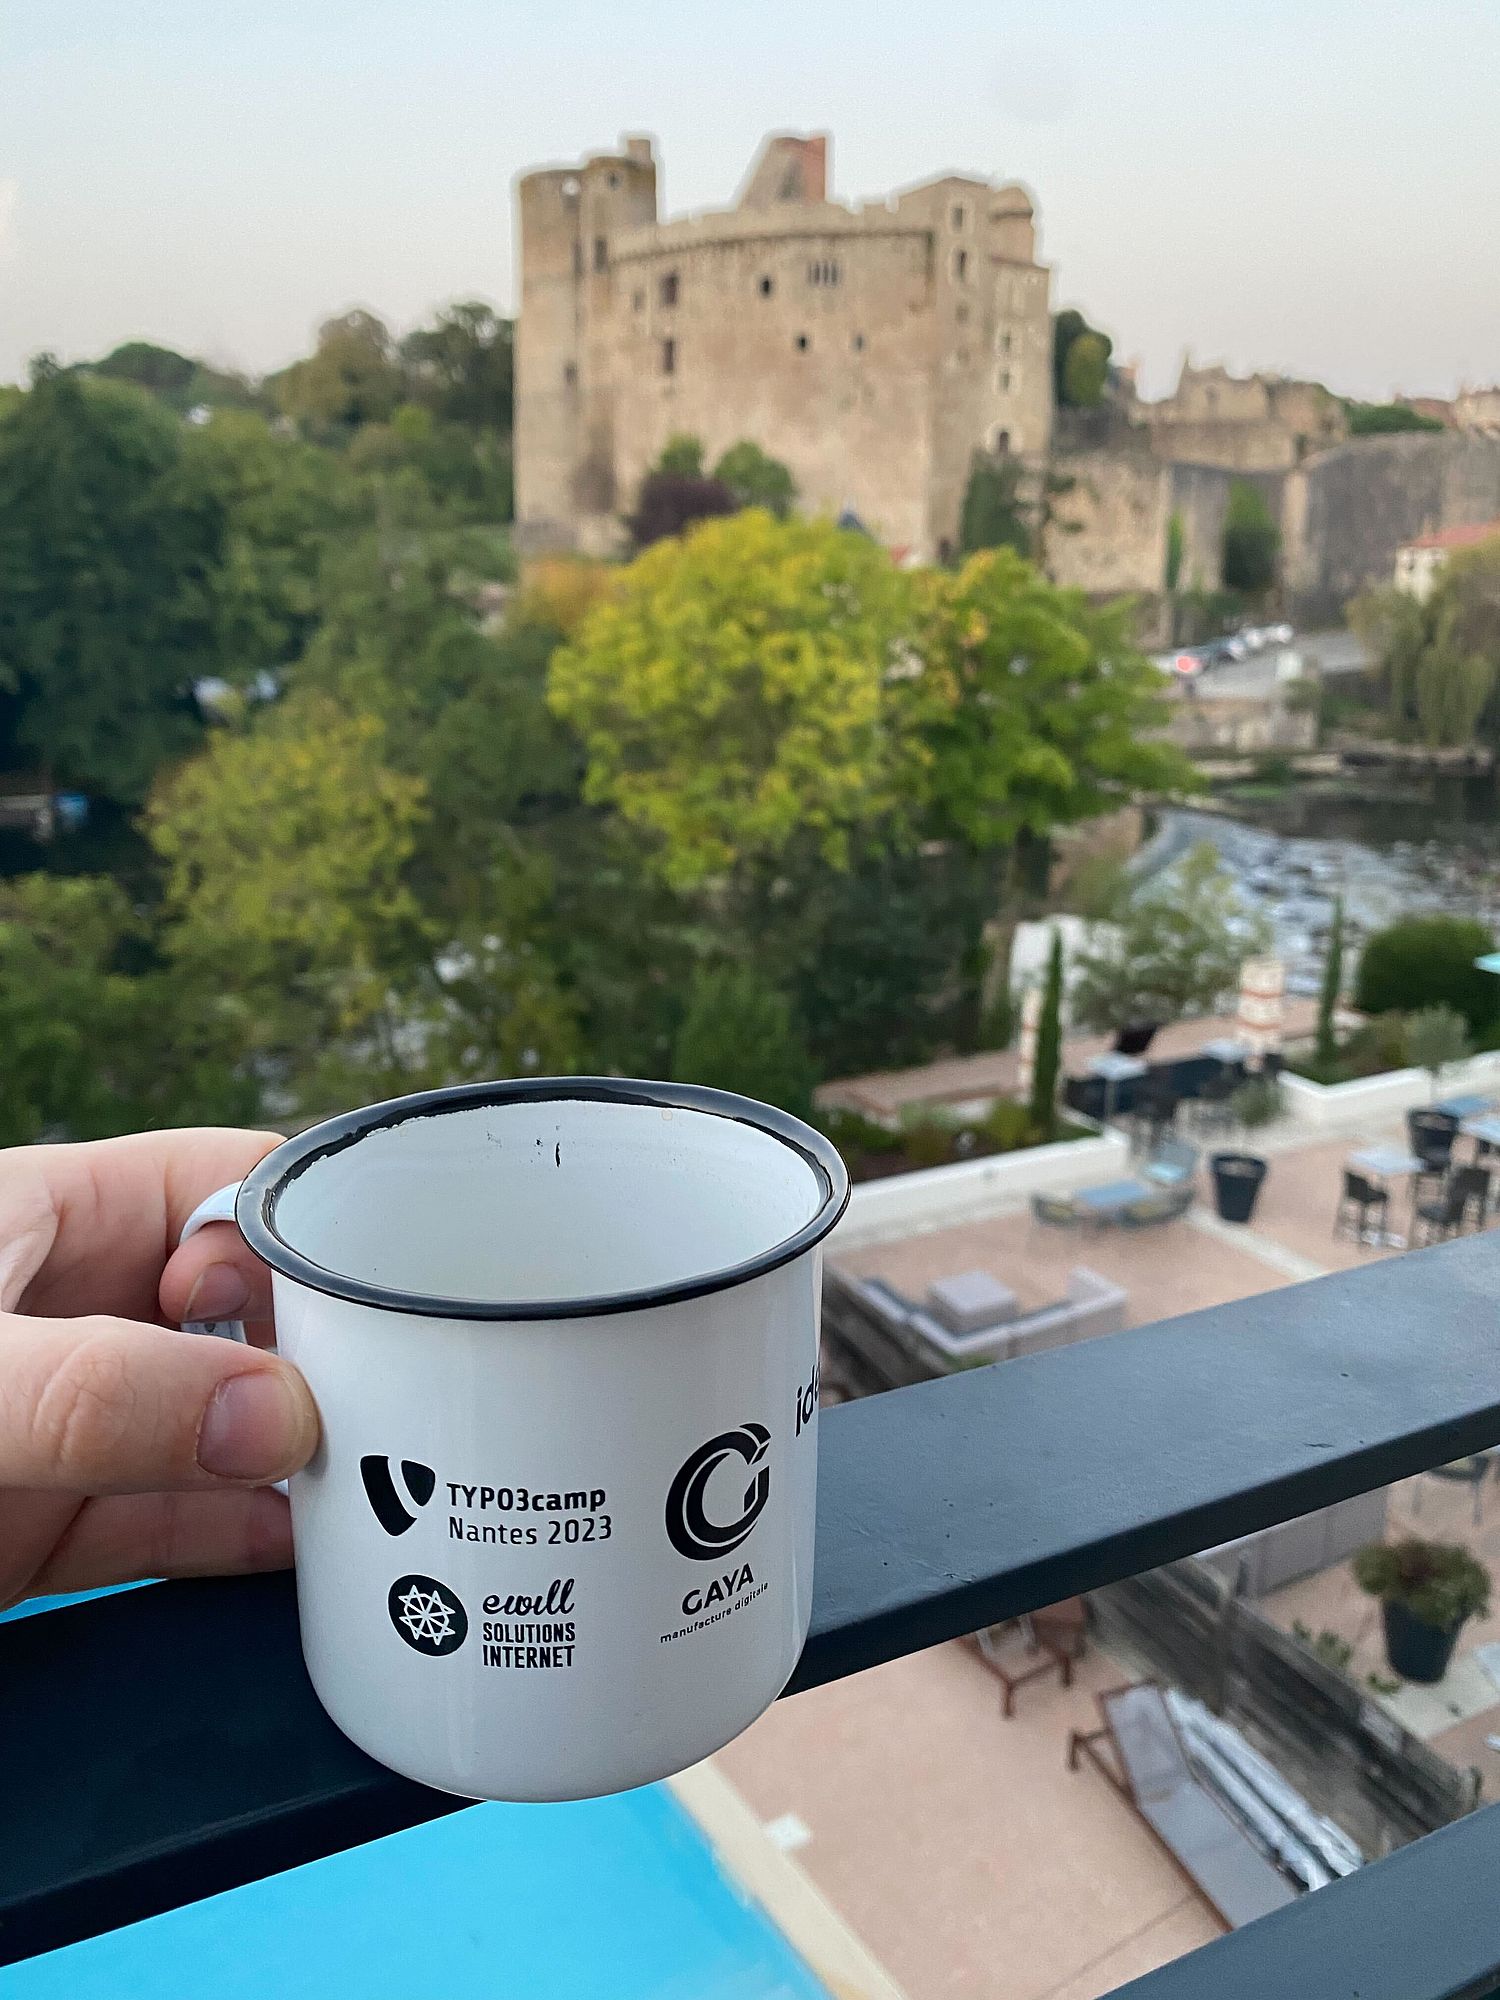 View of a balcony with a TYPO3 Camp Nantes cup in the foreground.